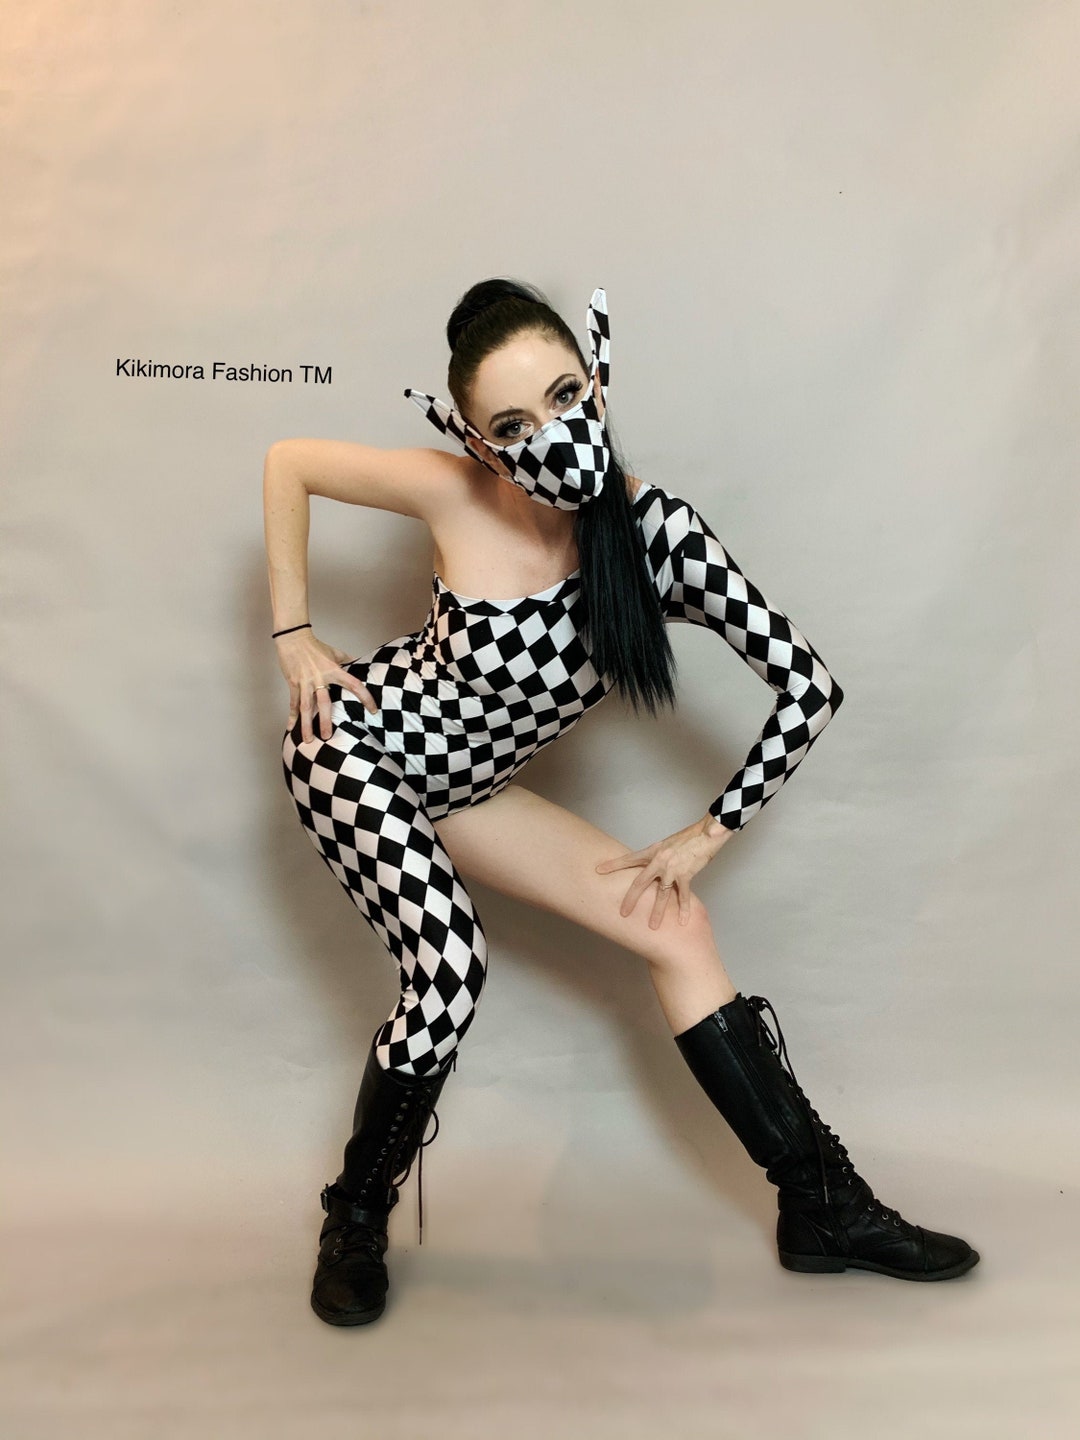 Harlequin Costume, New Trend, Spandex Catsuit , Bodysuit for Woman or Man.  Exotic Dance Wear 